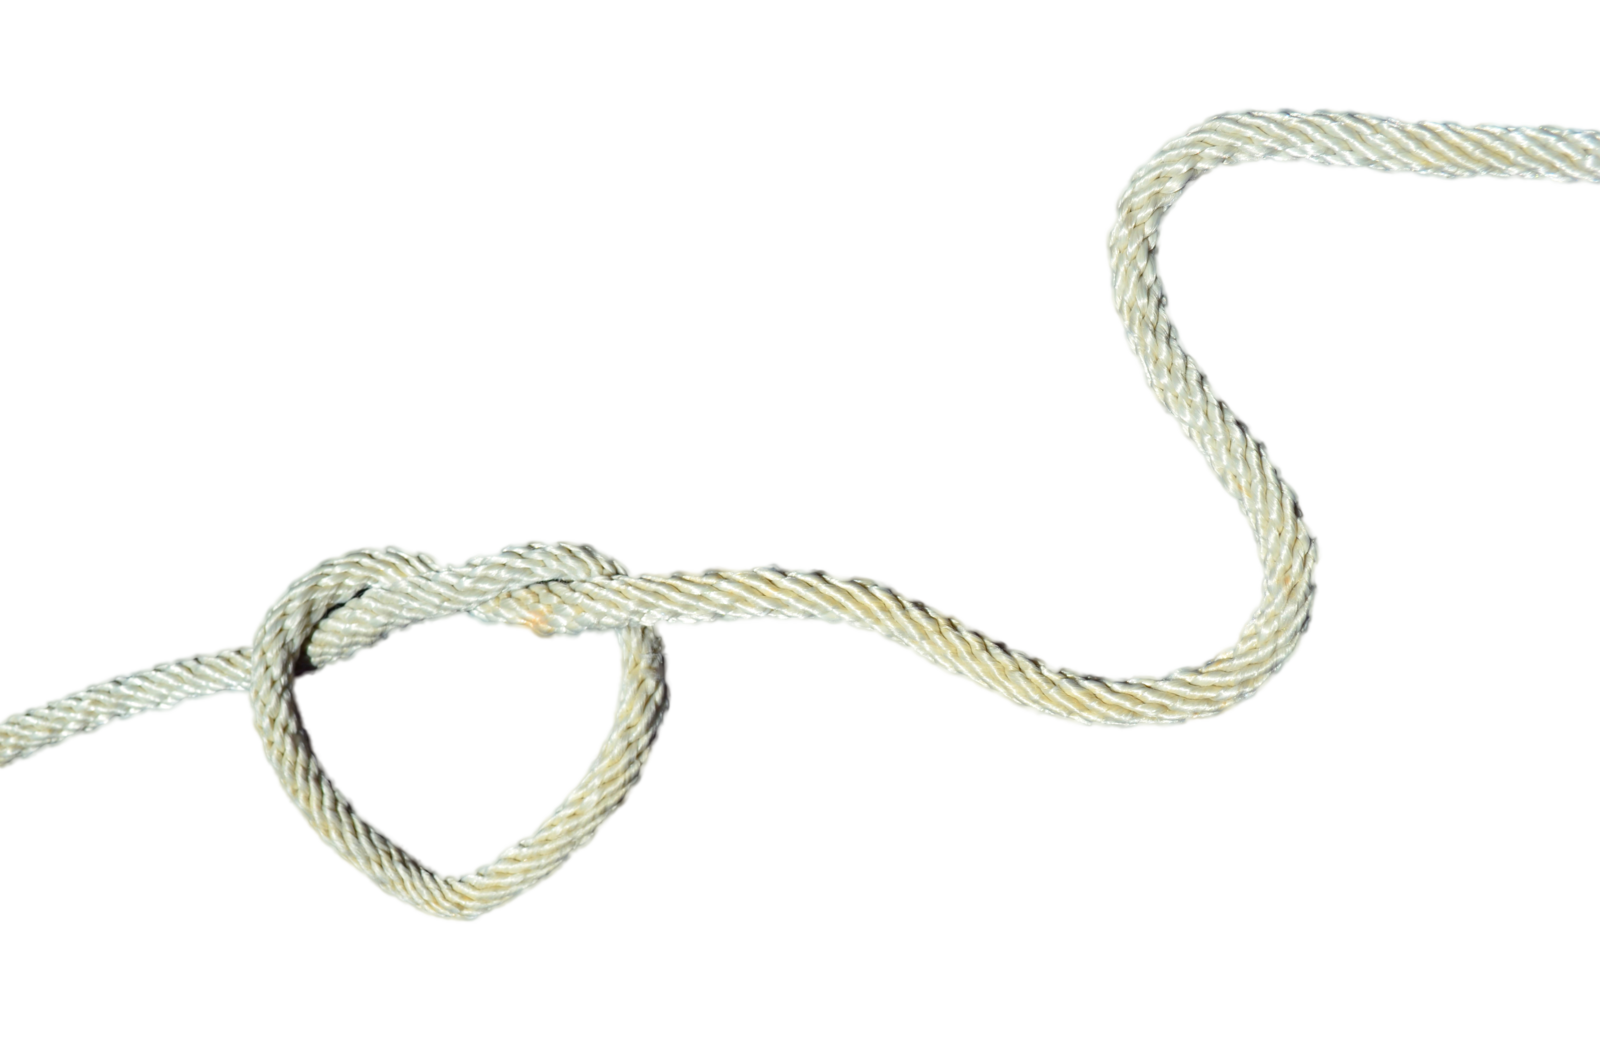 Download Rope Png Image For Free